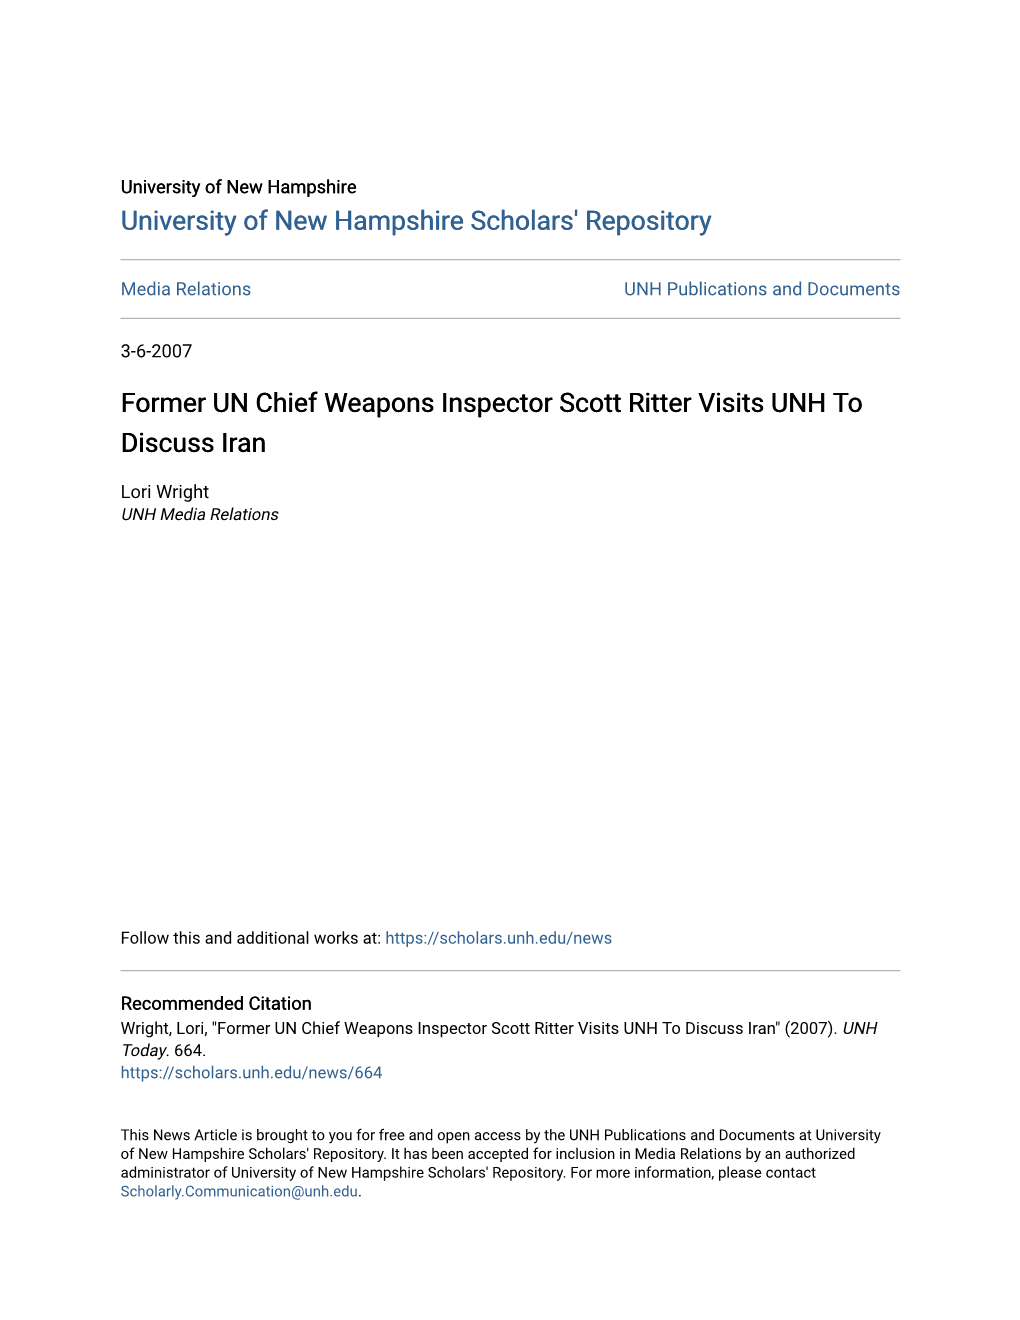 Former UN Chief Weapons Inspector Scott Ritter Visits UNH to Discuss Iran